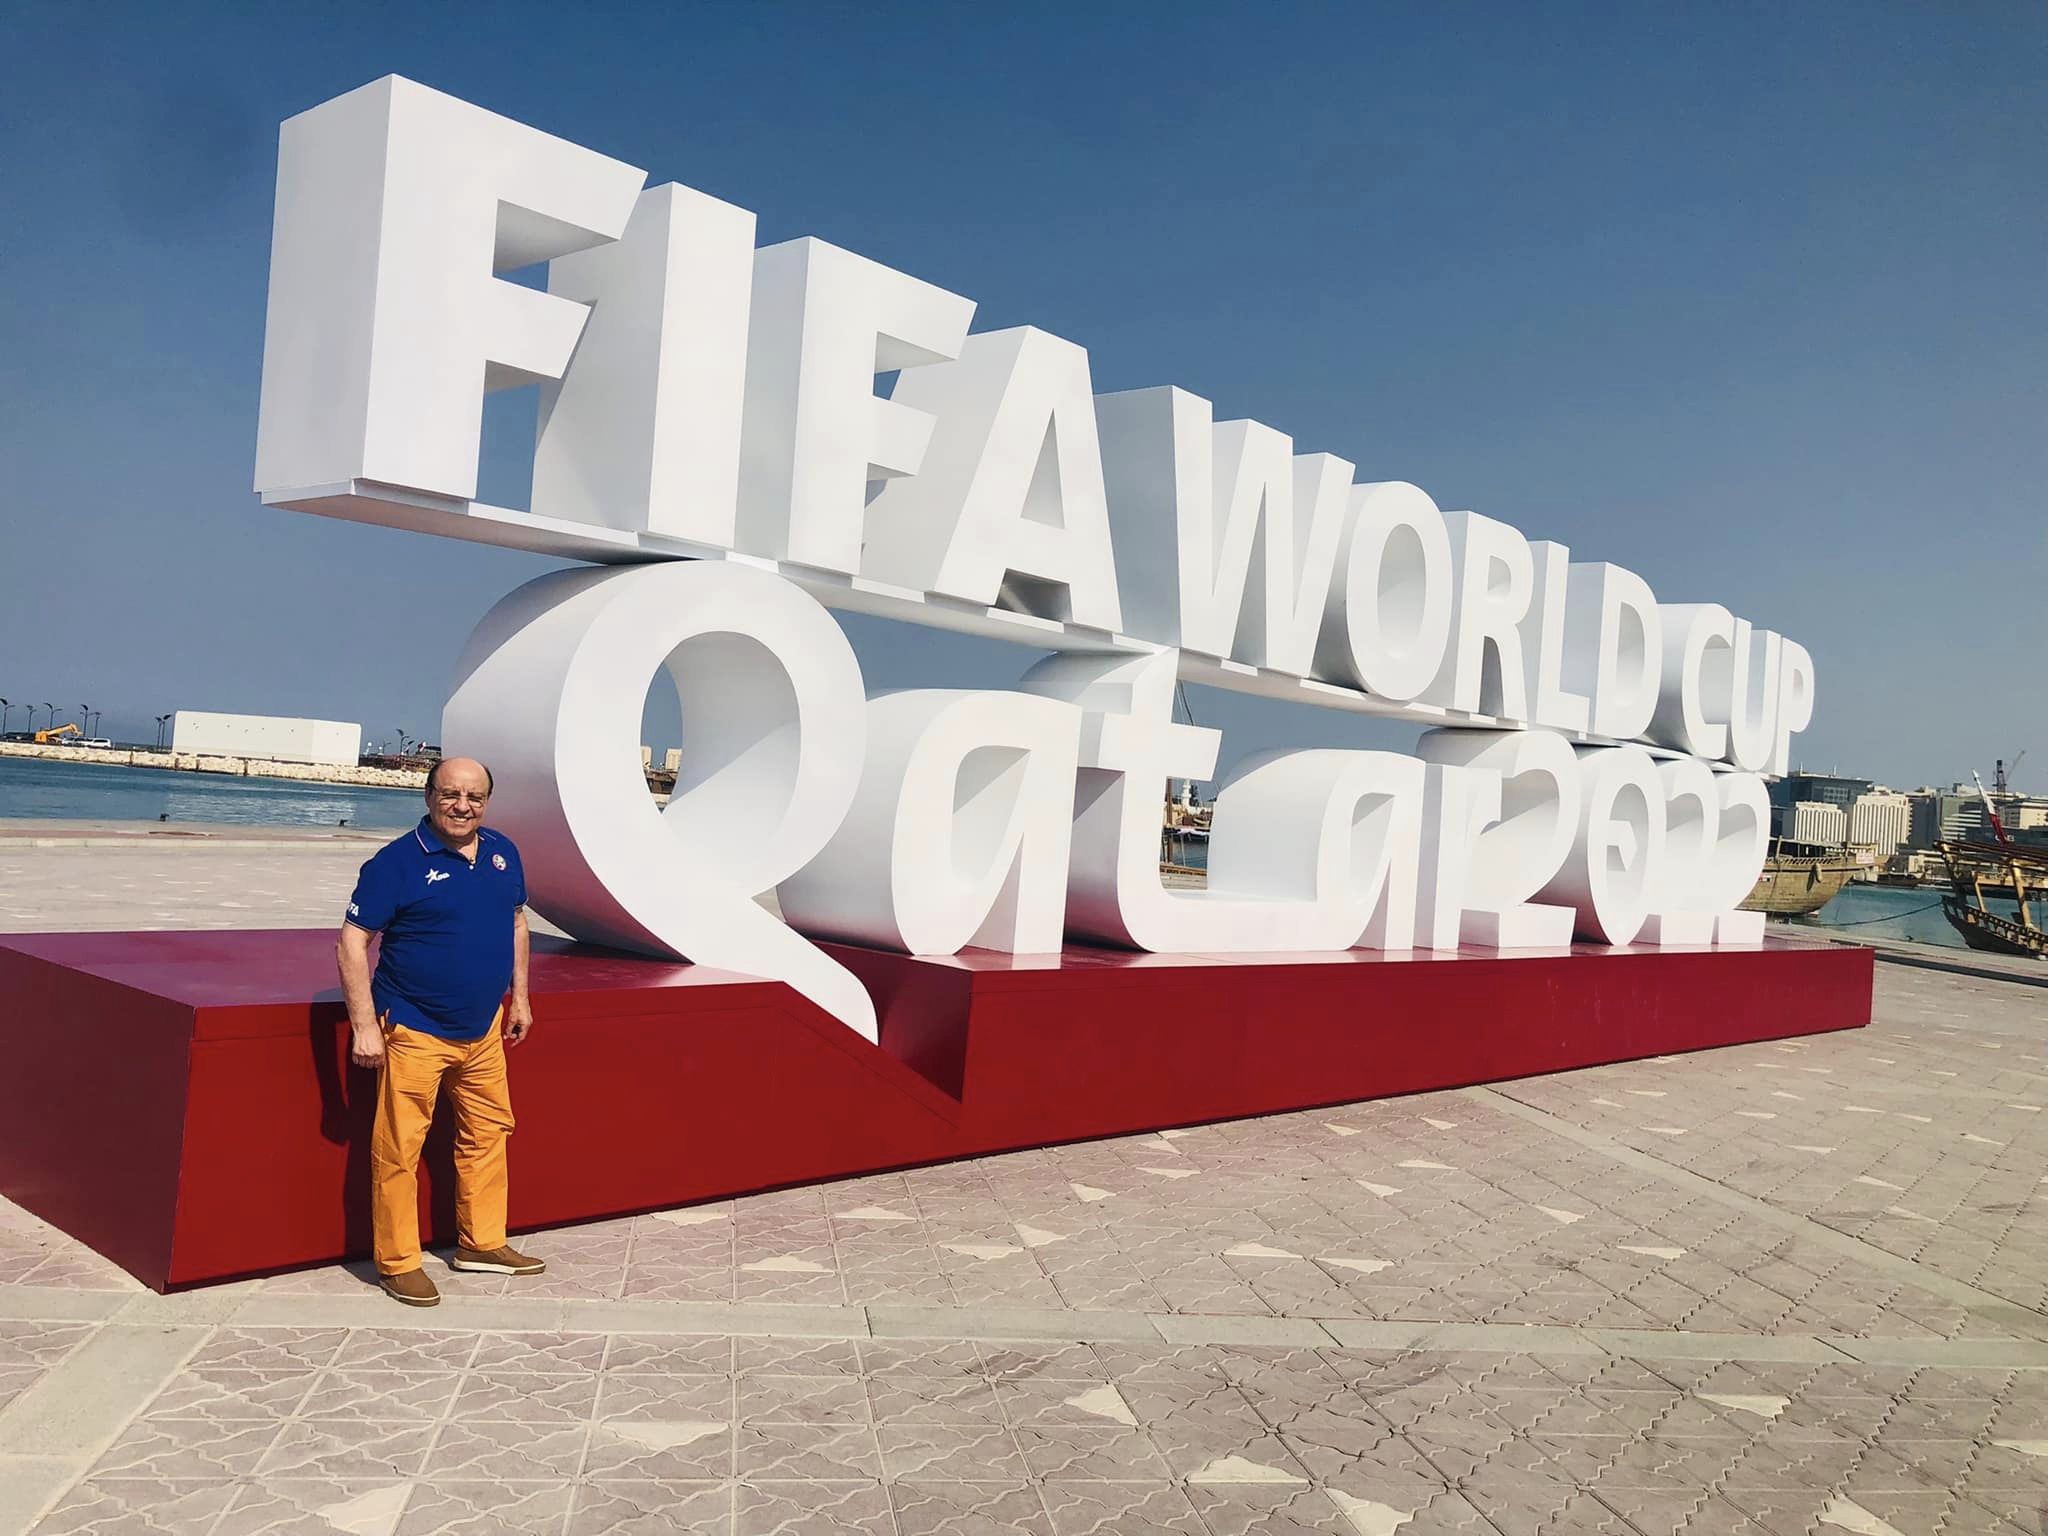 I was in Qatar a month before the main football event, took a walk…